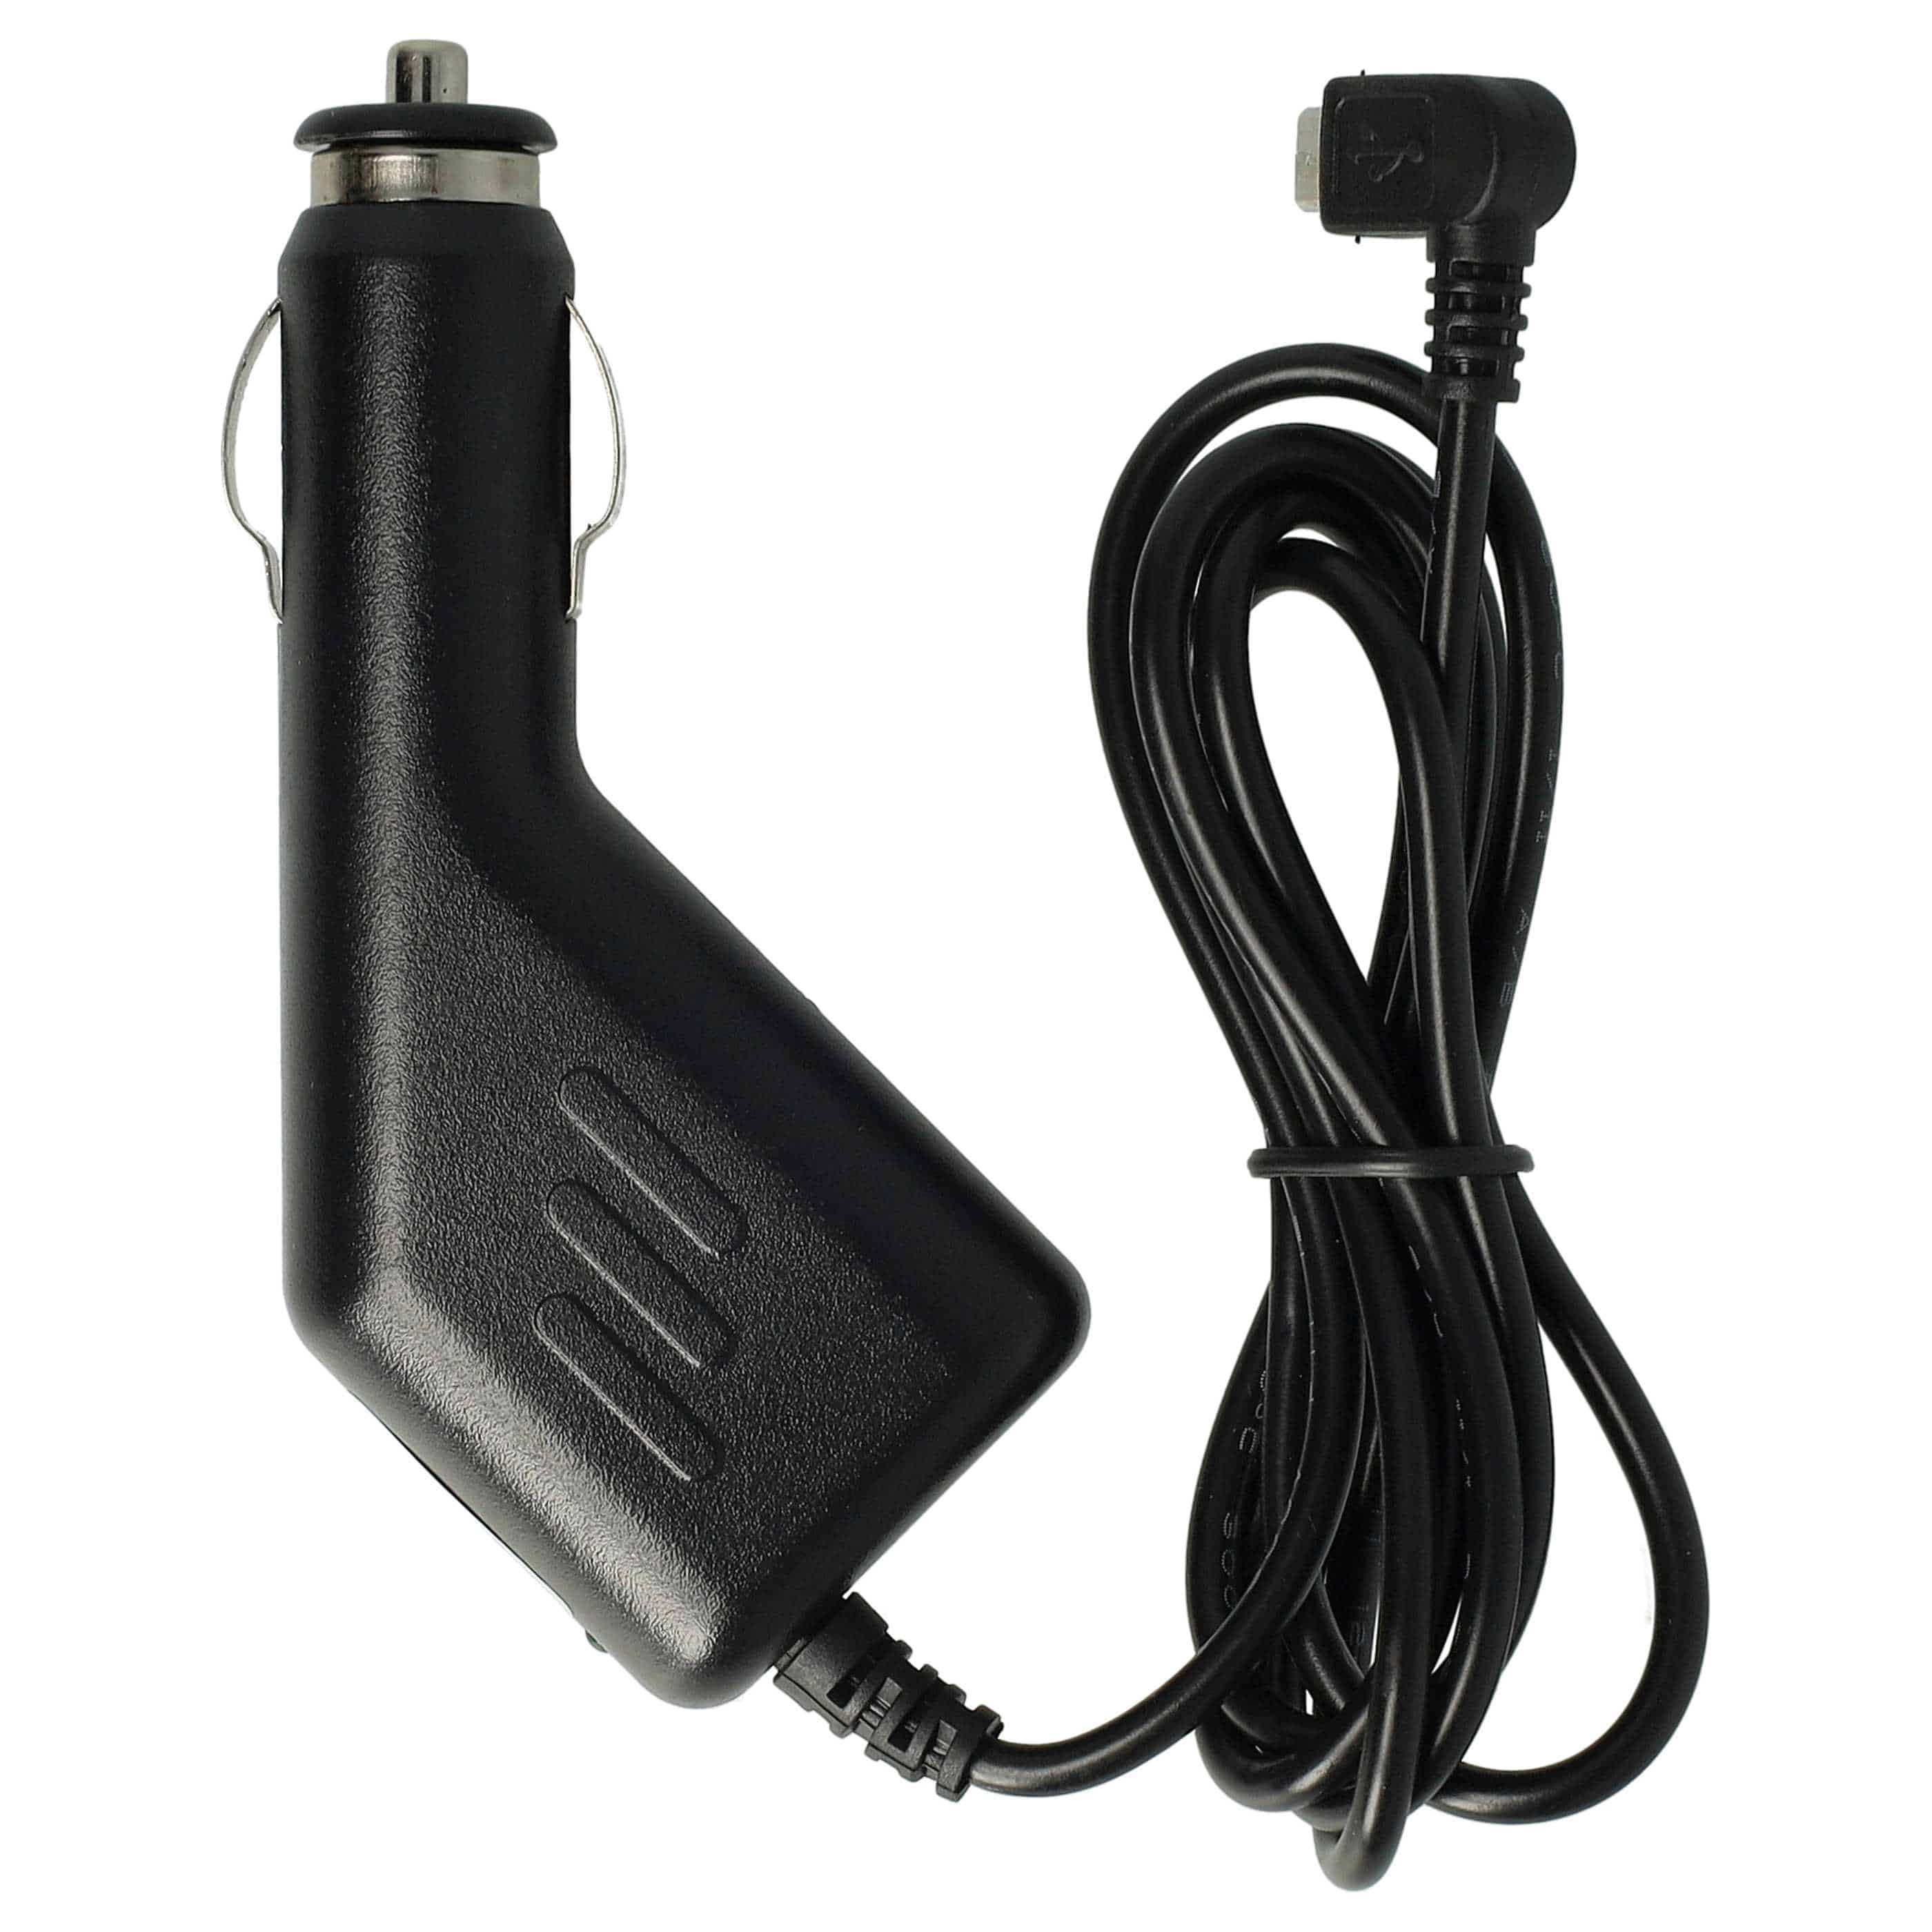 Micro-USB Car Charger Cable 1.0 A suitable for C150 Bea-fonDevices like Smartphone, GPS, Sat Navs, 90° Plug